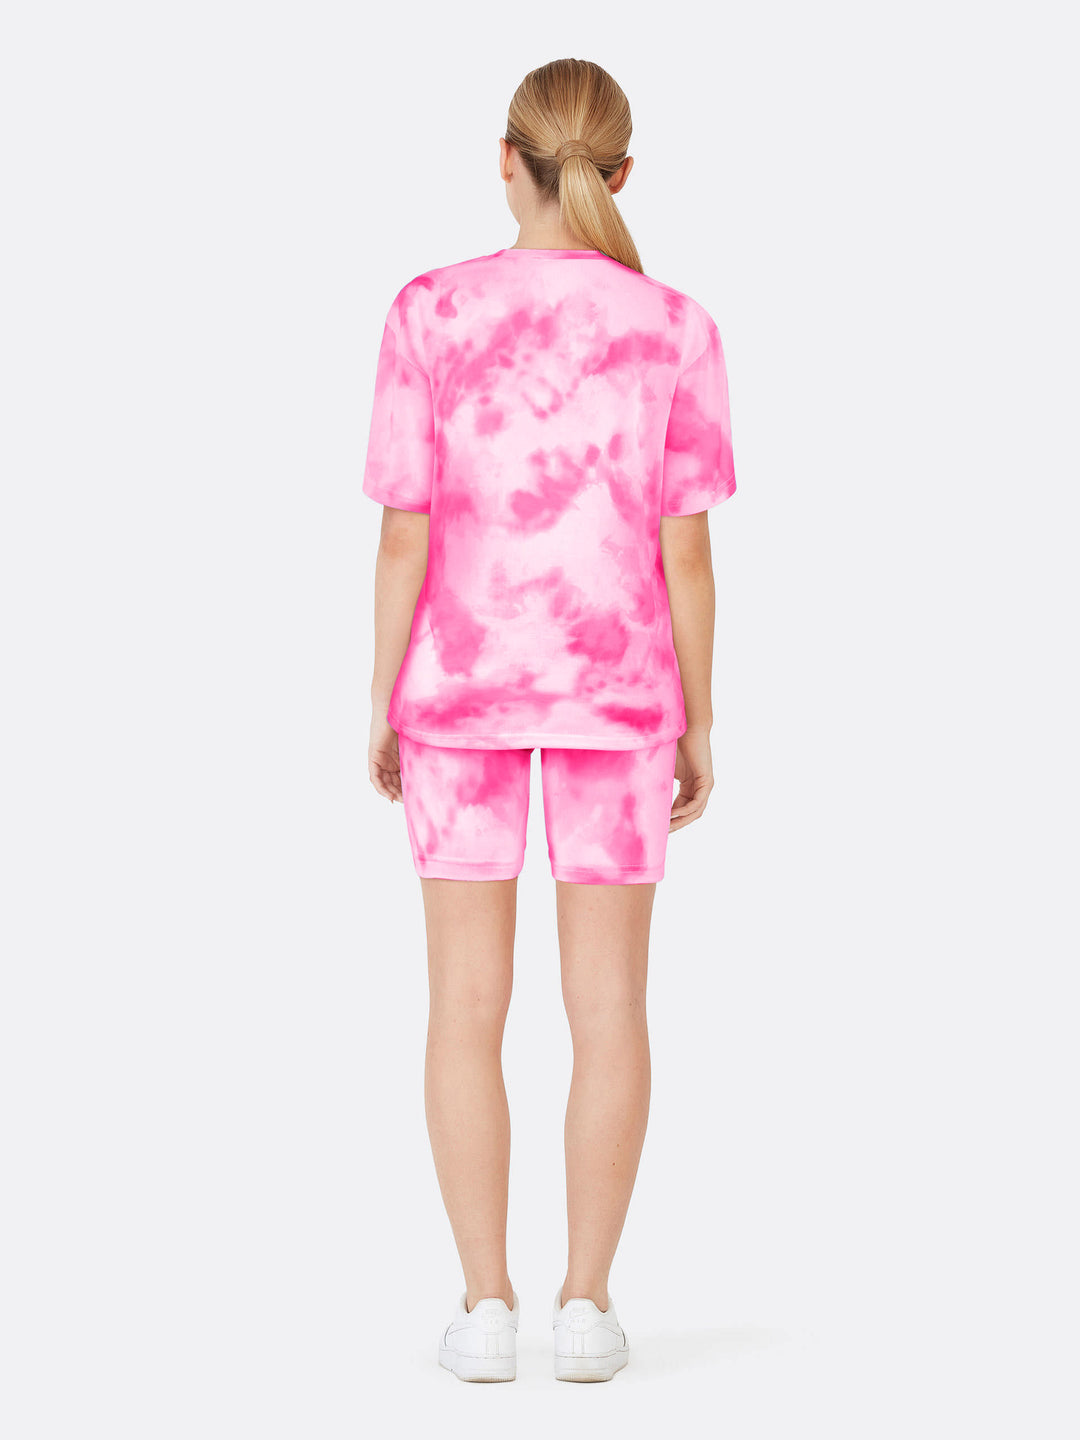 Tie Dye Loose Two-Piece Jogger Set Short Sleeve T-shirt and Shorts Pink Back | Jolovies